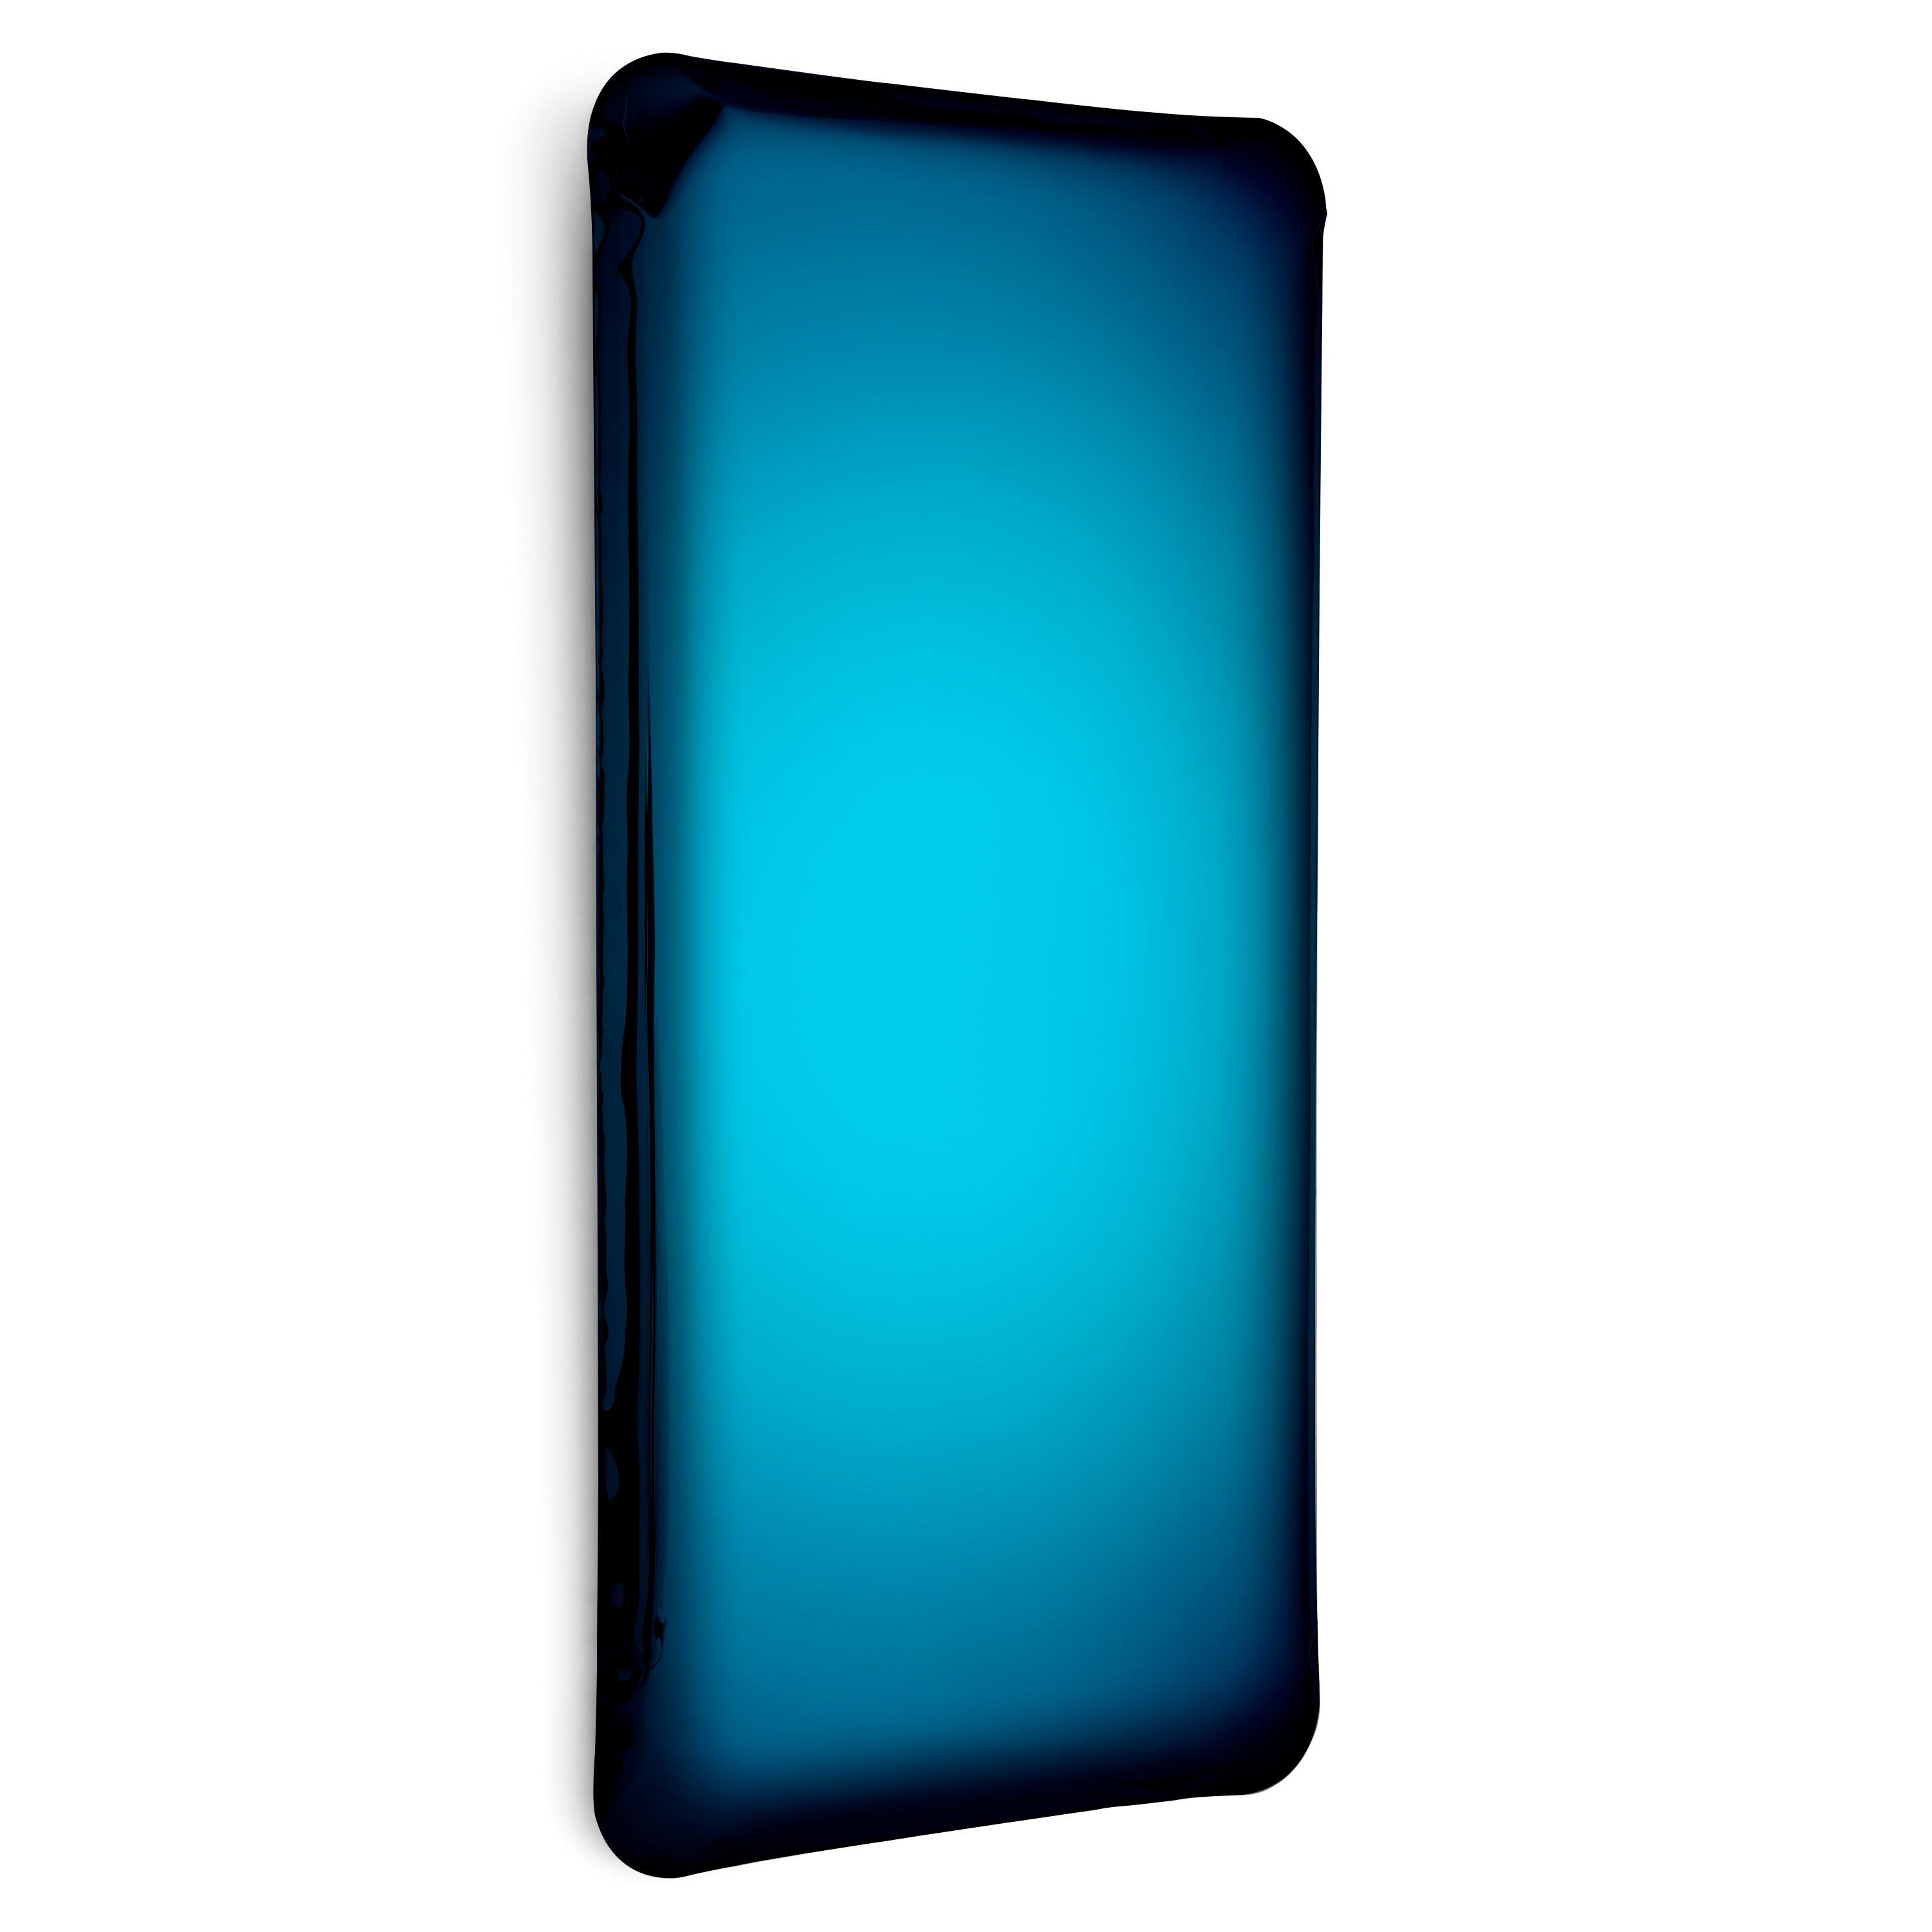 Deep Space Blue Tafla Q2 sculptural wall mirror by Zieta
Dimensions: D 6 x W 60 x H 120 cm 
Material: Stainless steel. 
Finish: Deep Space Blue.
Available in finishes: Stainless Steel, Deep Space Blue, Emerald, Saphire, Saphire/Emerald, Dark Matter,